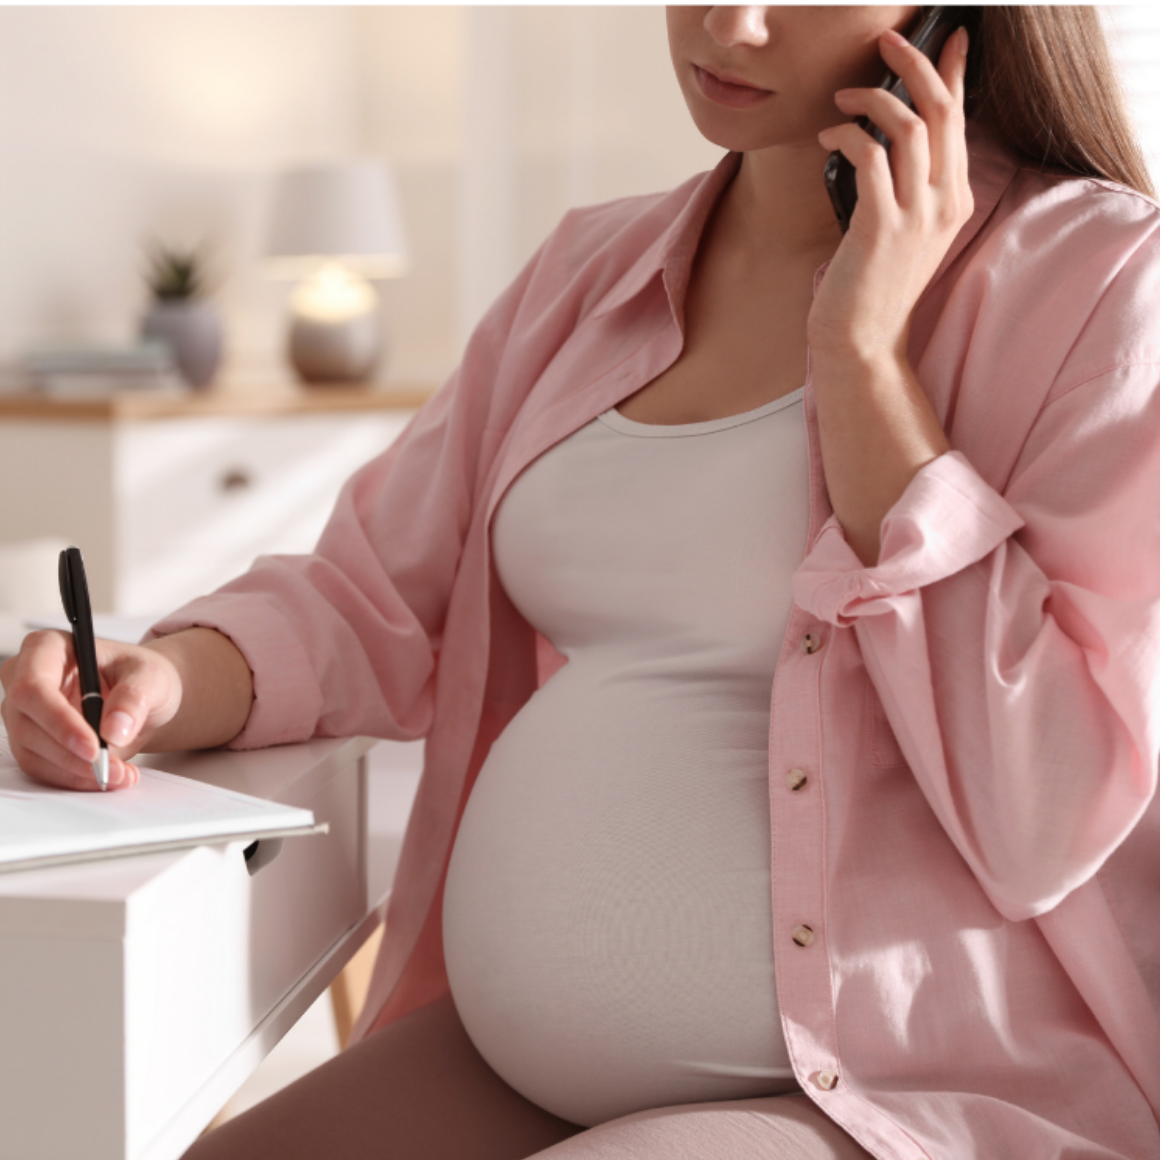 Pregnant person wearing pink and white on phone at desk